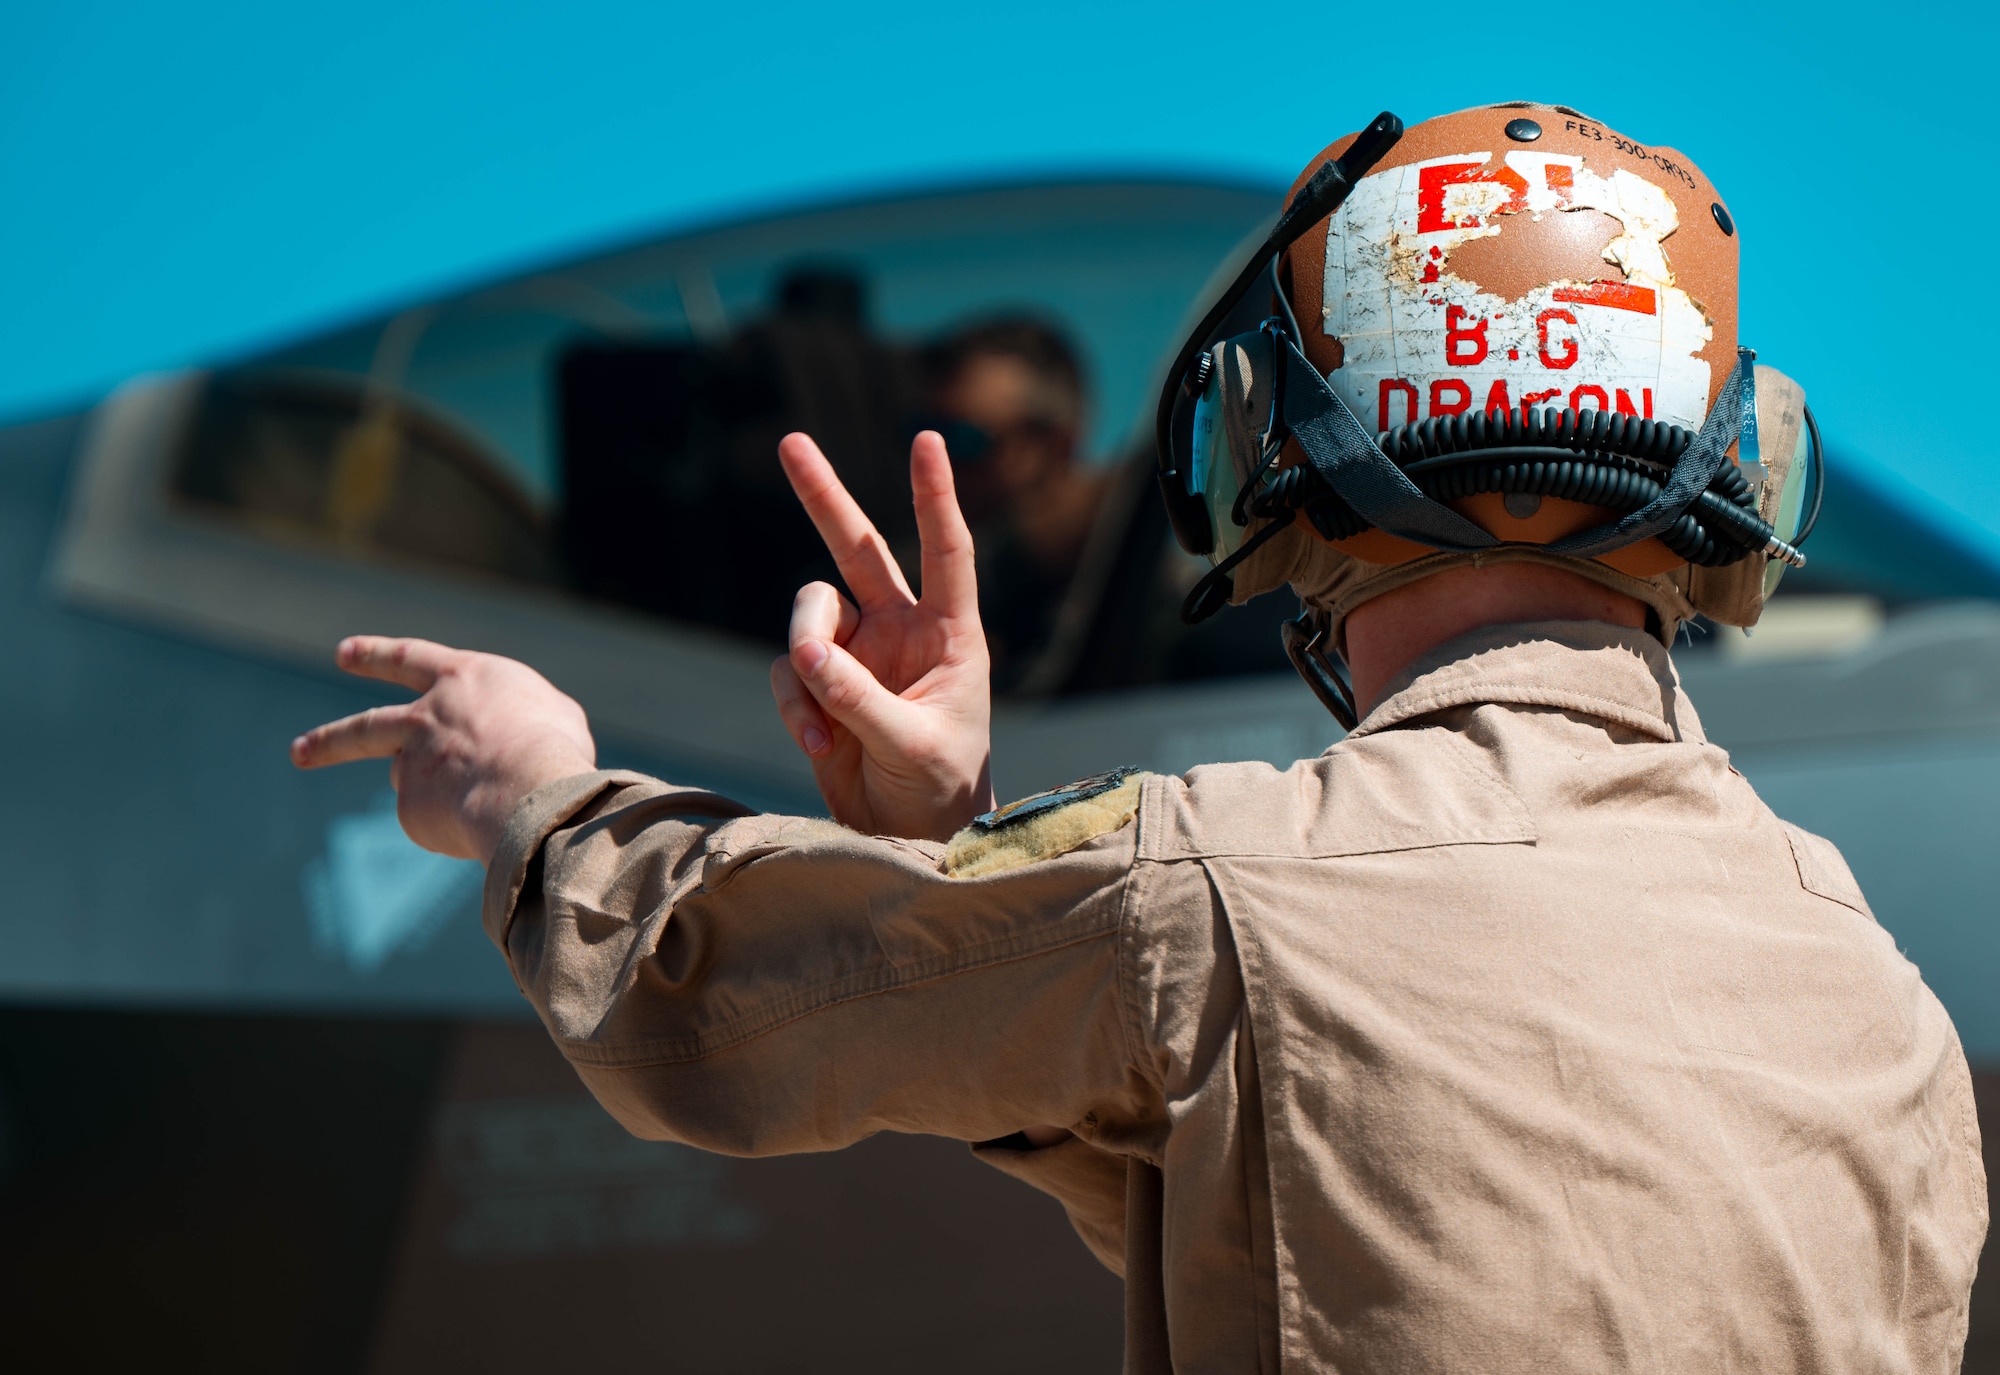 U.S. Marine Corps F-35C Lightning II plane captains from Marine Corps Air Station Yuma participated in hot pit refueling training for F-35A aircraft